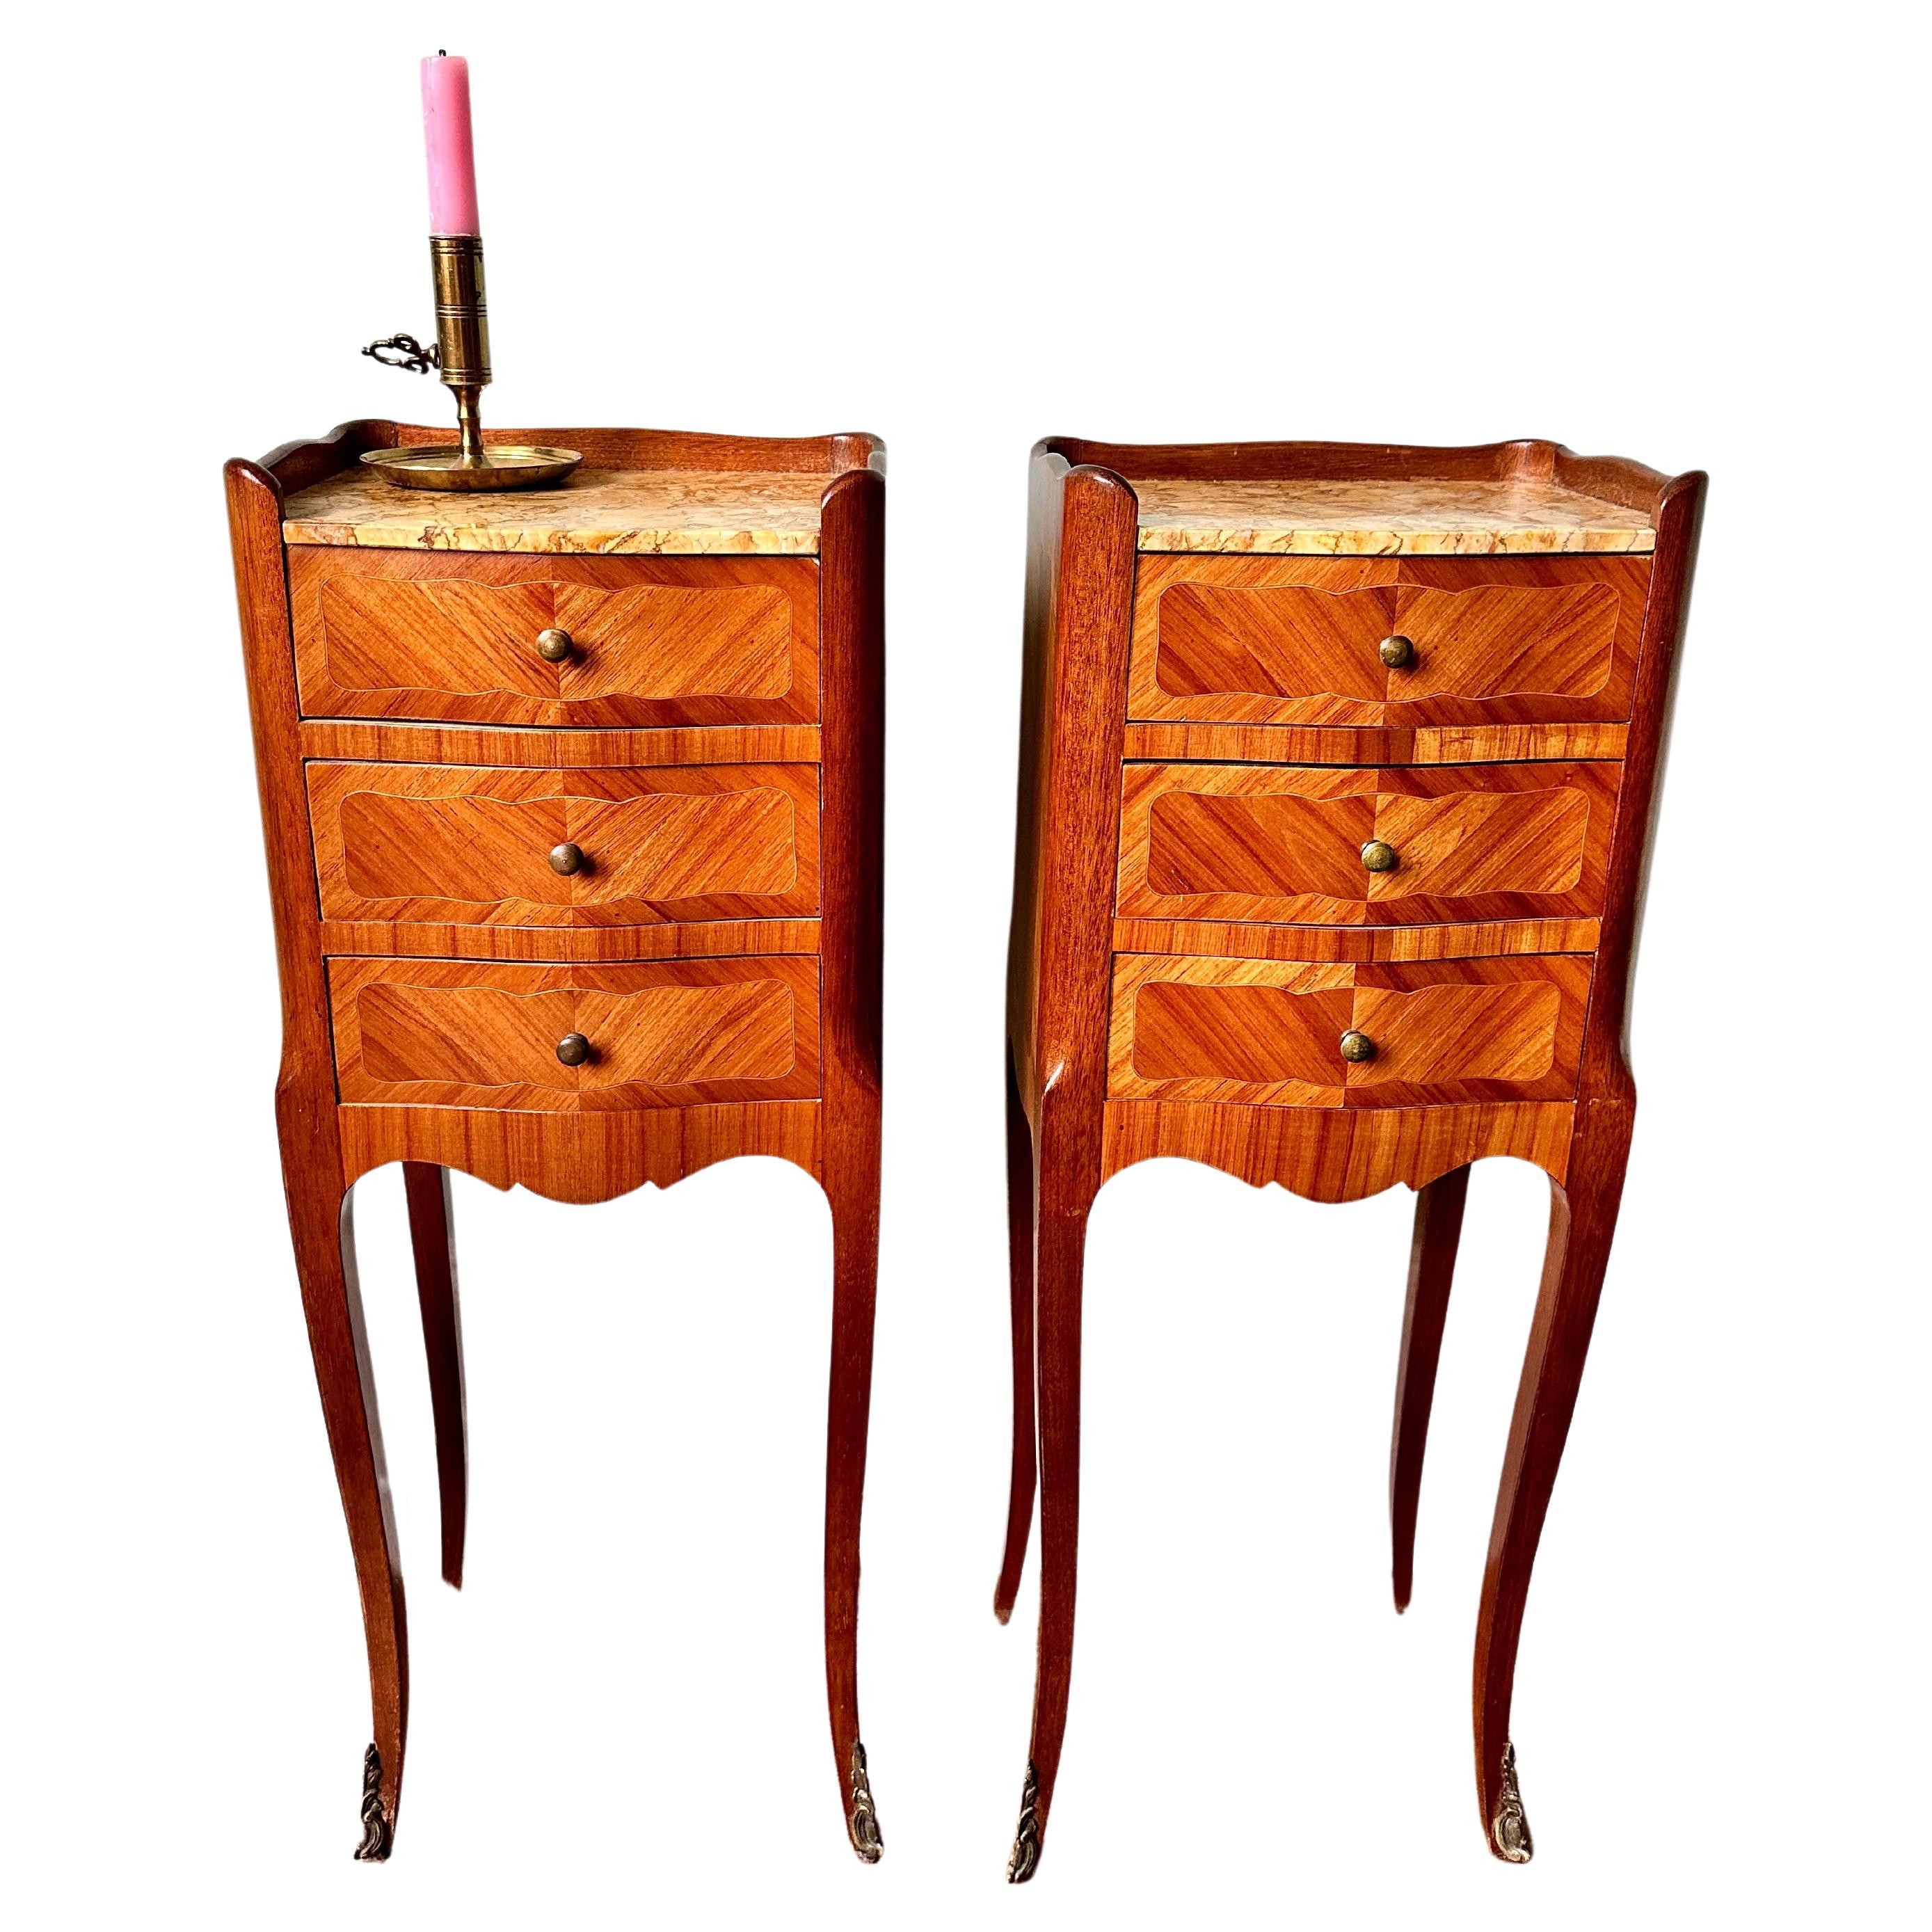 Pair Of Early C20th French Kingwood & Marble Bedside Tables or Night Stands  